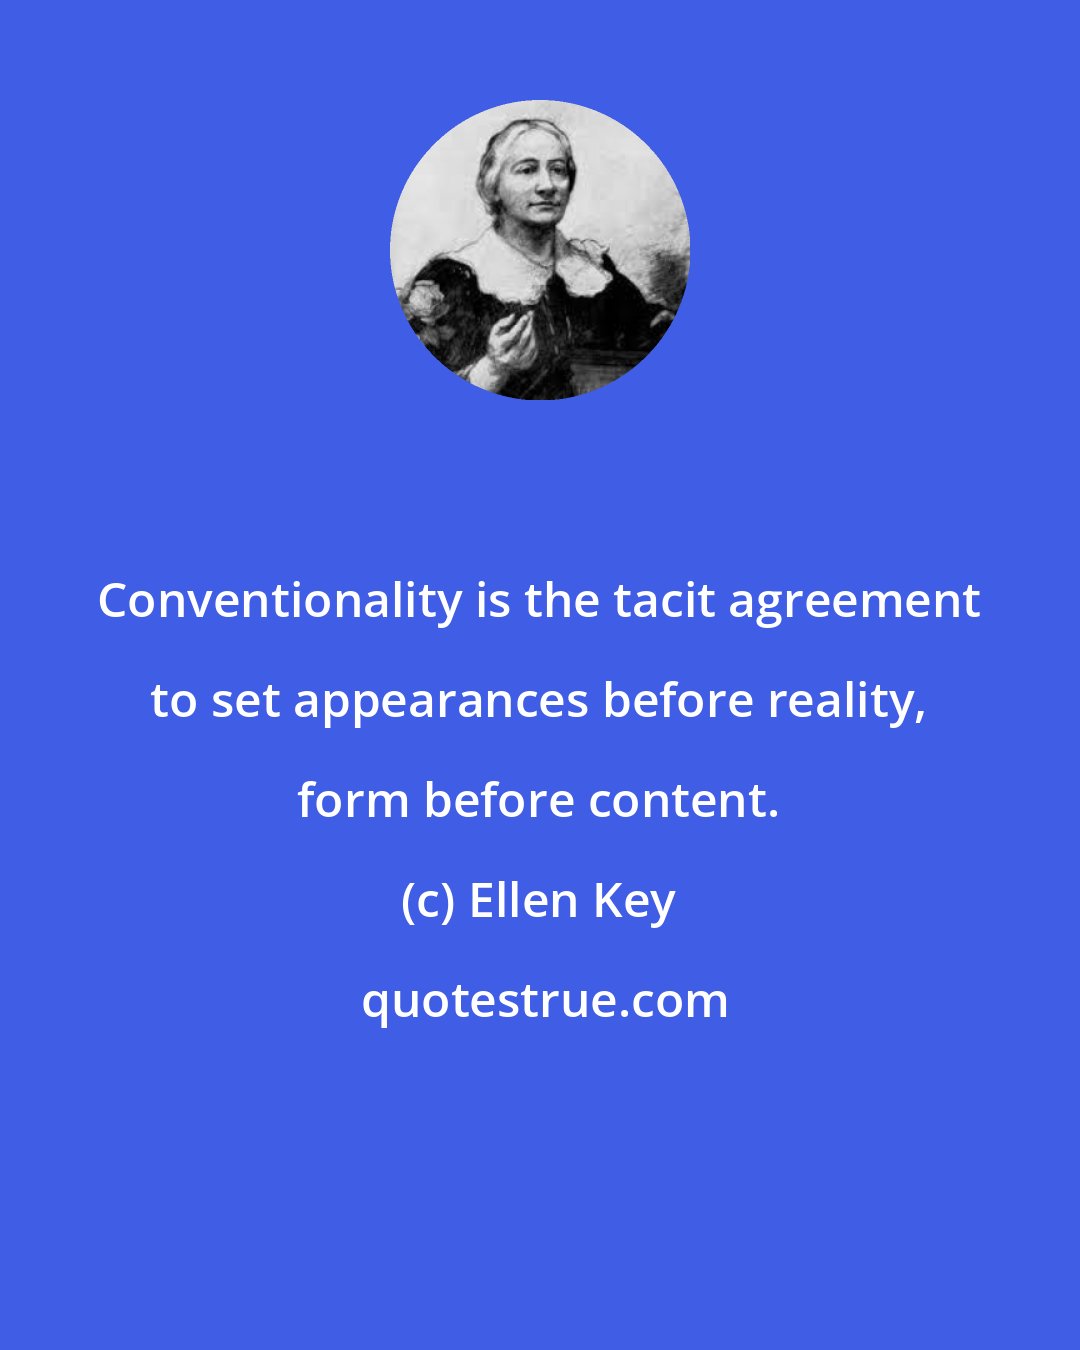 Ellen Key: Conventionality is the tacit agreement to set appearances before reality, form before content.